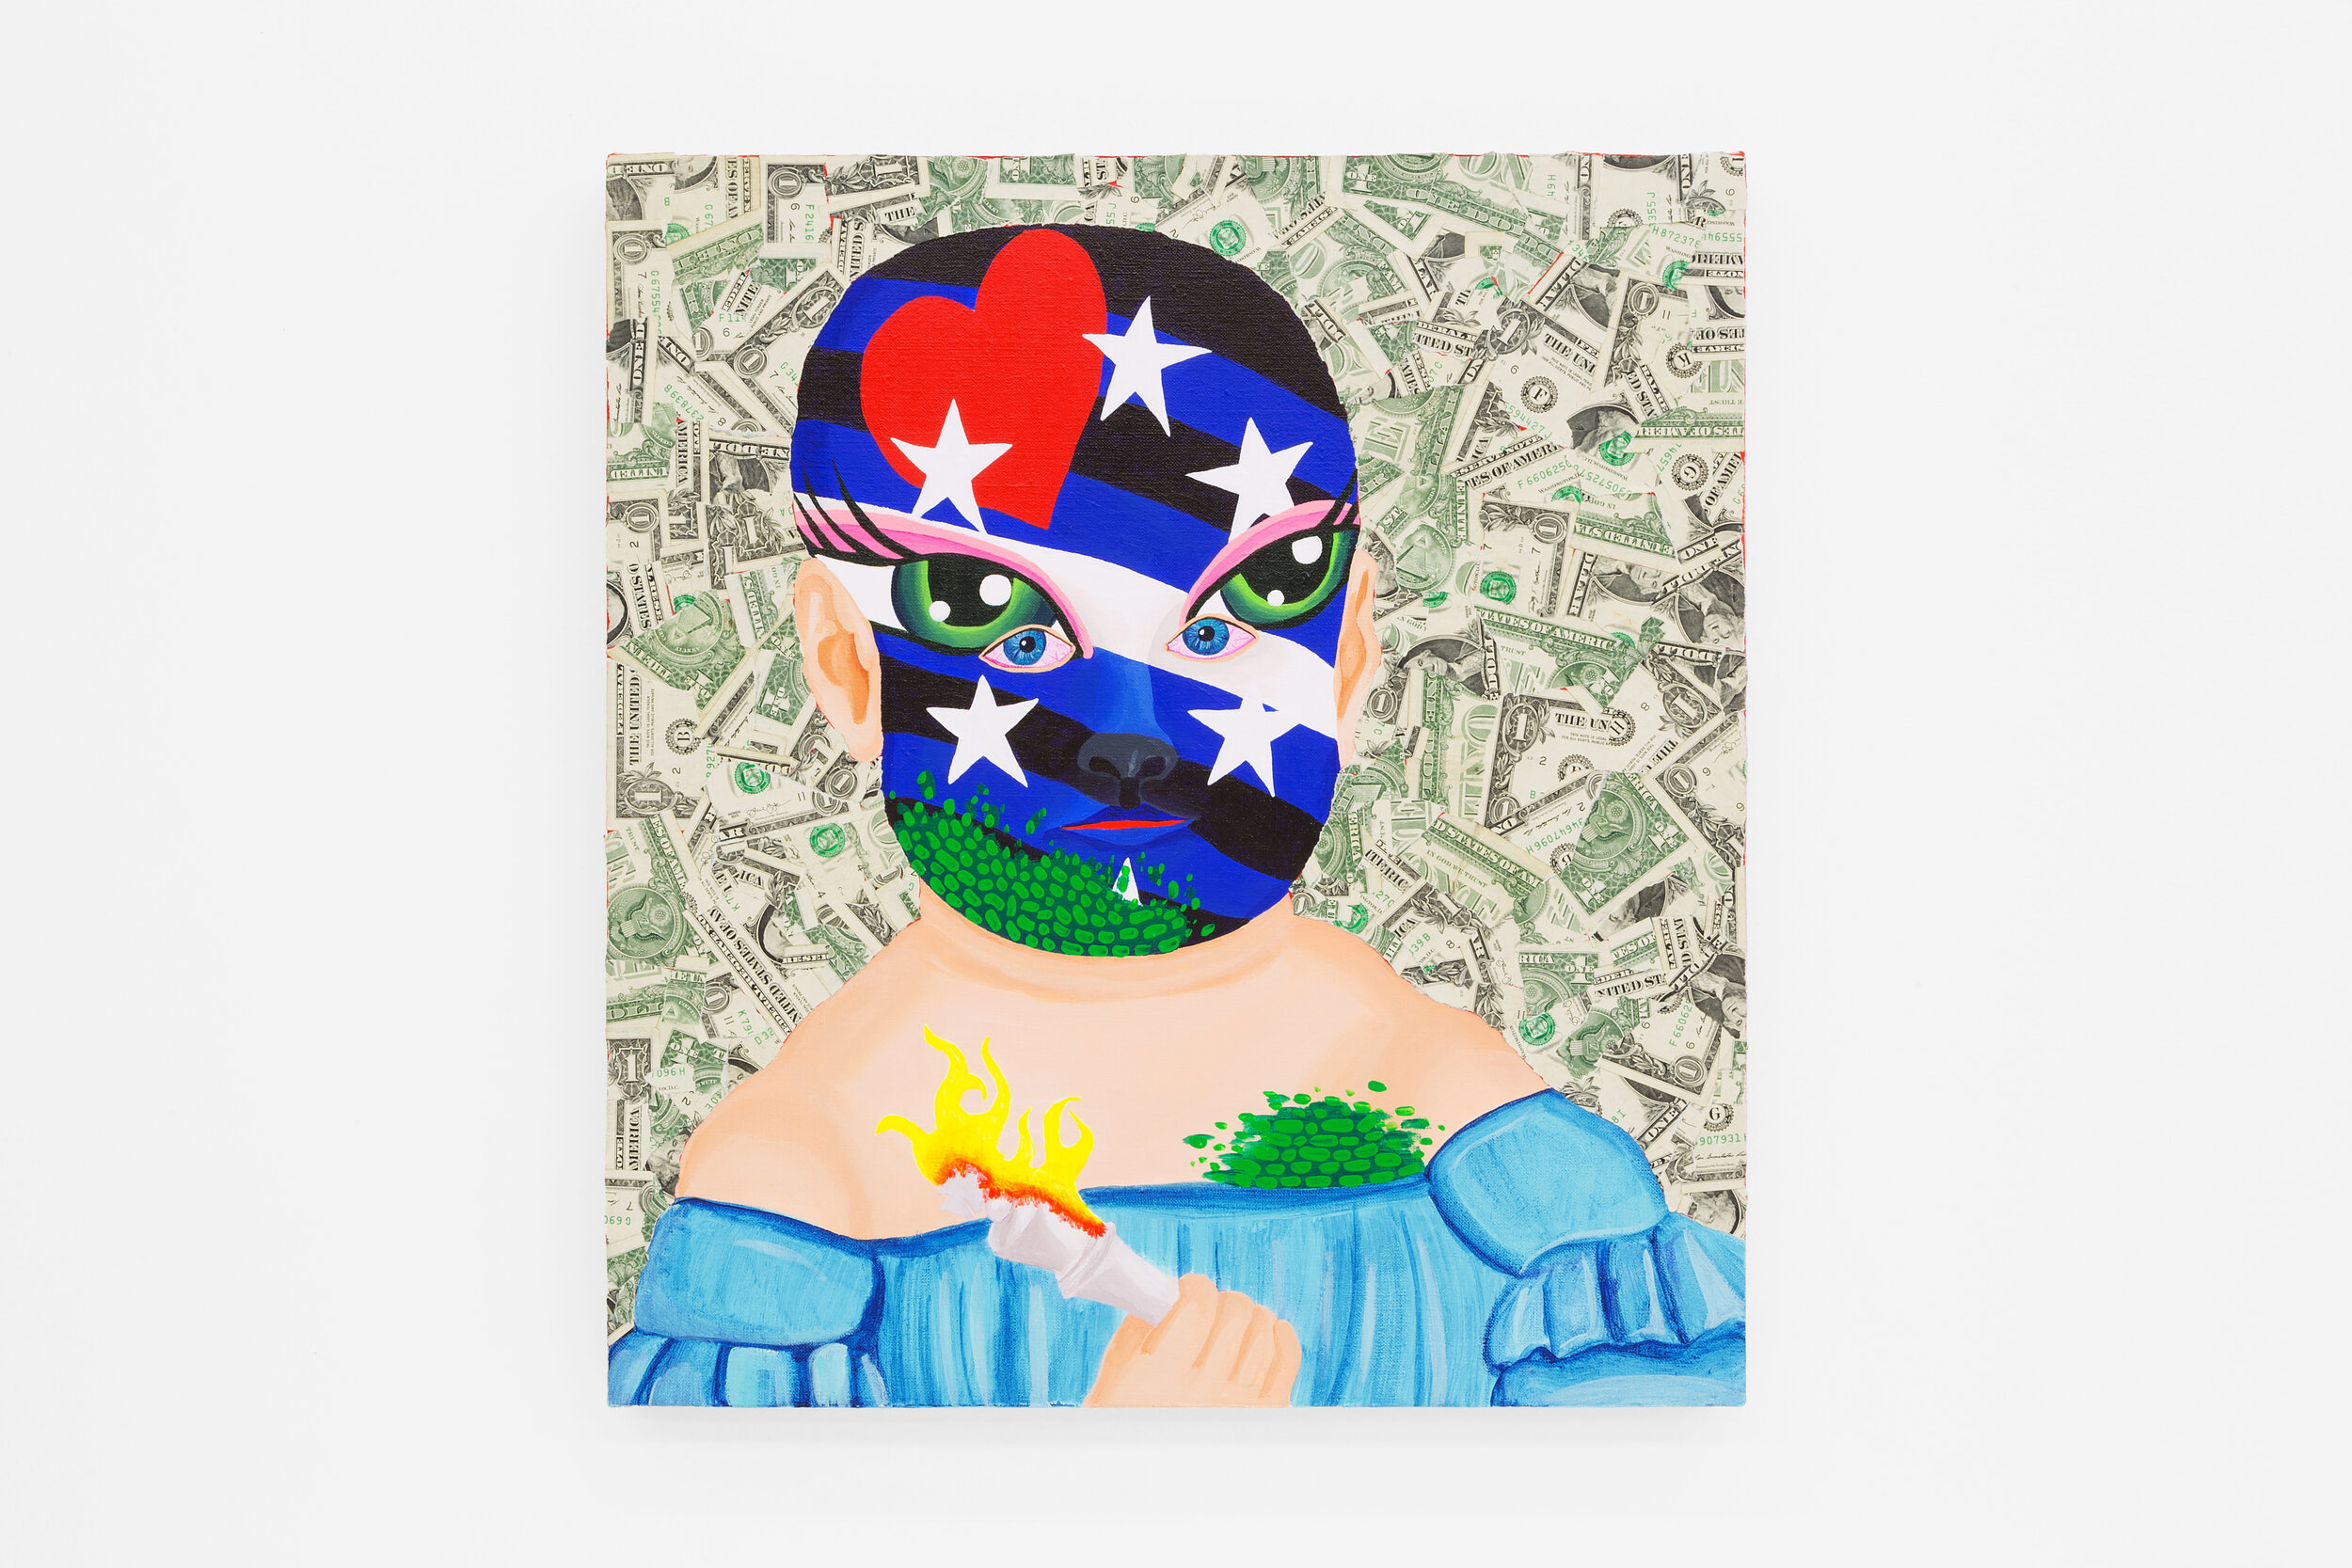   Baby with Burning King (Leather Pride Face Paint),  2019  21 x 19 x 1.5 inches (53.34 x 48.26 x 3.81 cm.)  Acrylic and American dollar bills on linen  Private collection, New York 